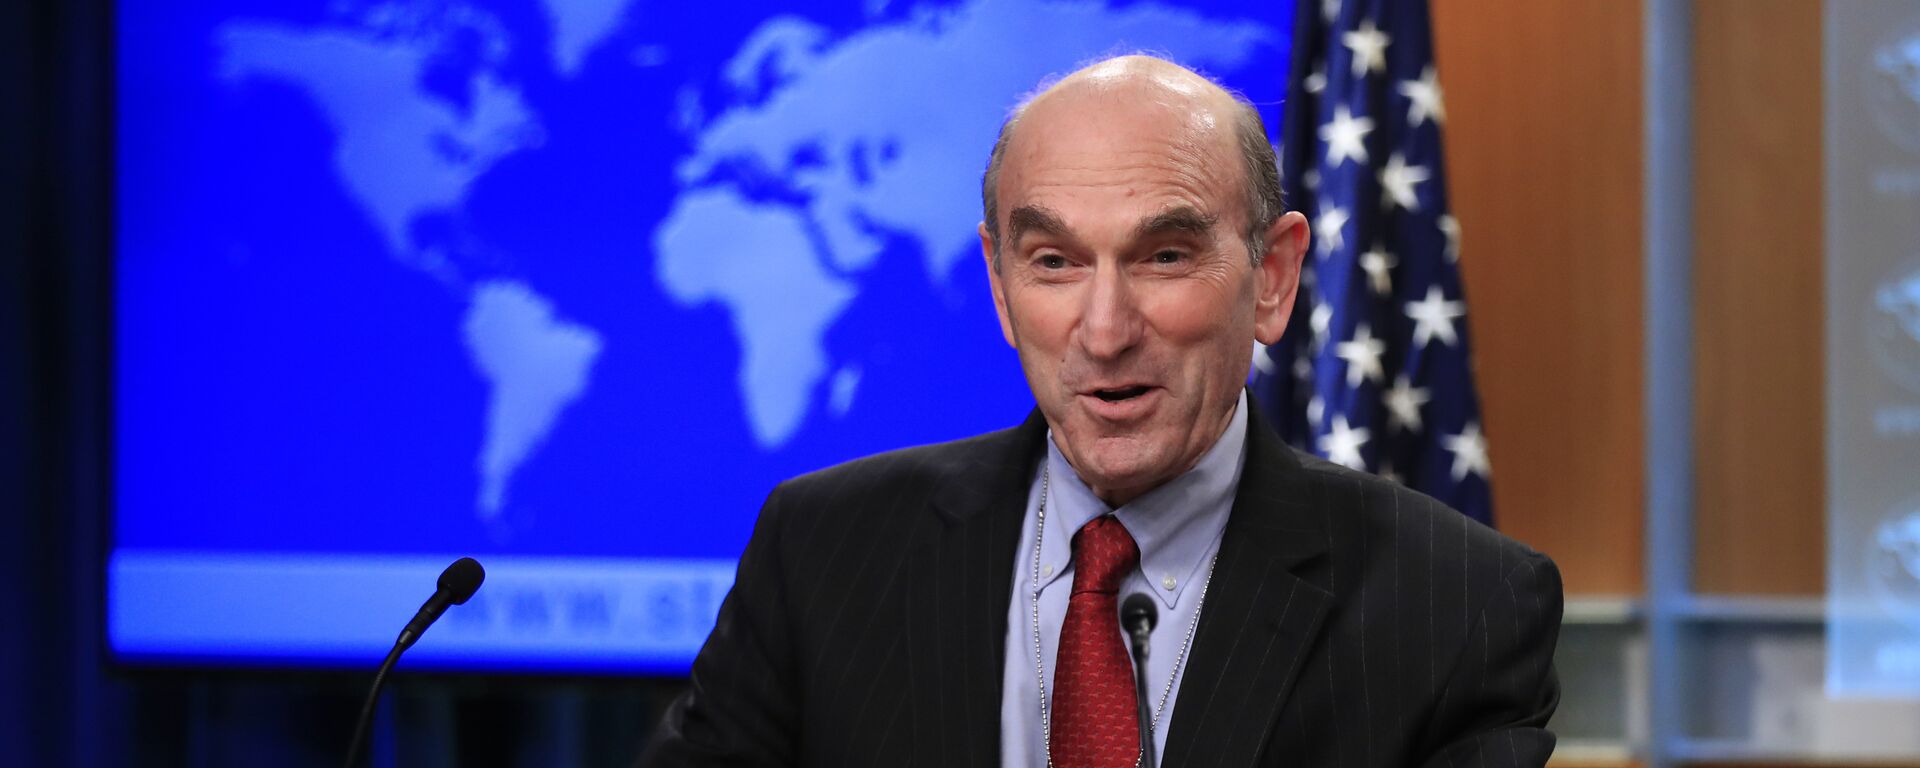 Elliott Abrams talks to reporters after Secretary of State Mike Pompeo named the hawkish former Republican official to handle U.S. policy toward Venezuela during a news conference at the State Department in Washington, Friday, Jan. 25, 2019 - Sputnik International, 1920, 27.04.2019